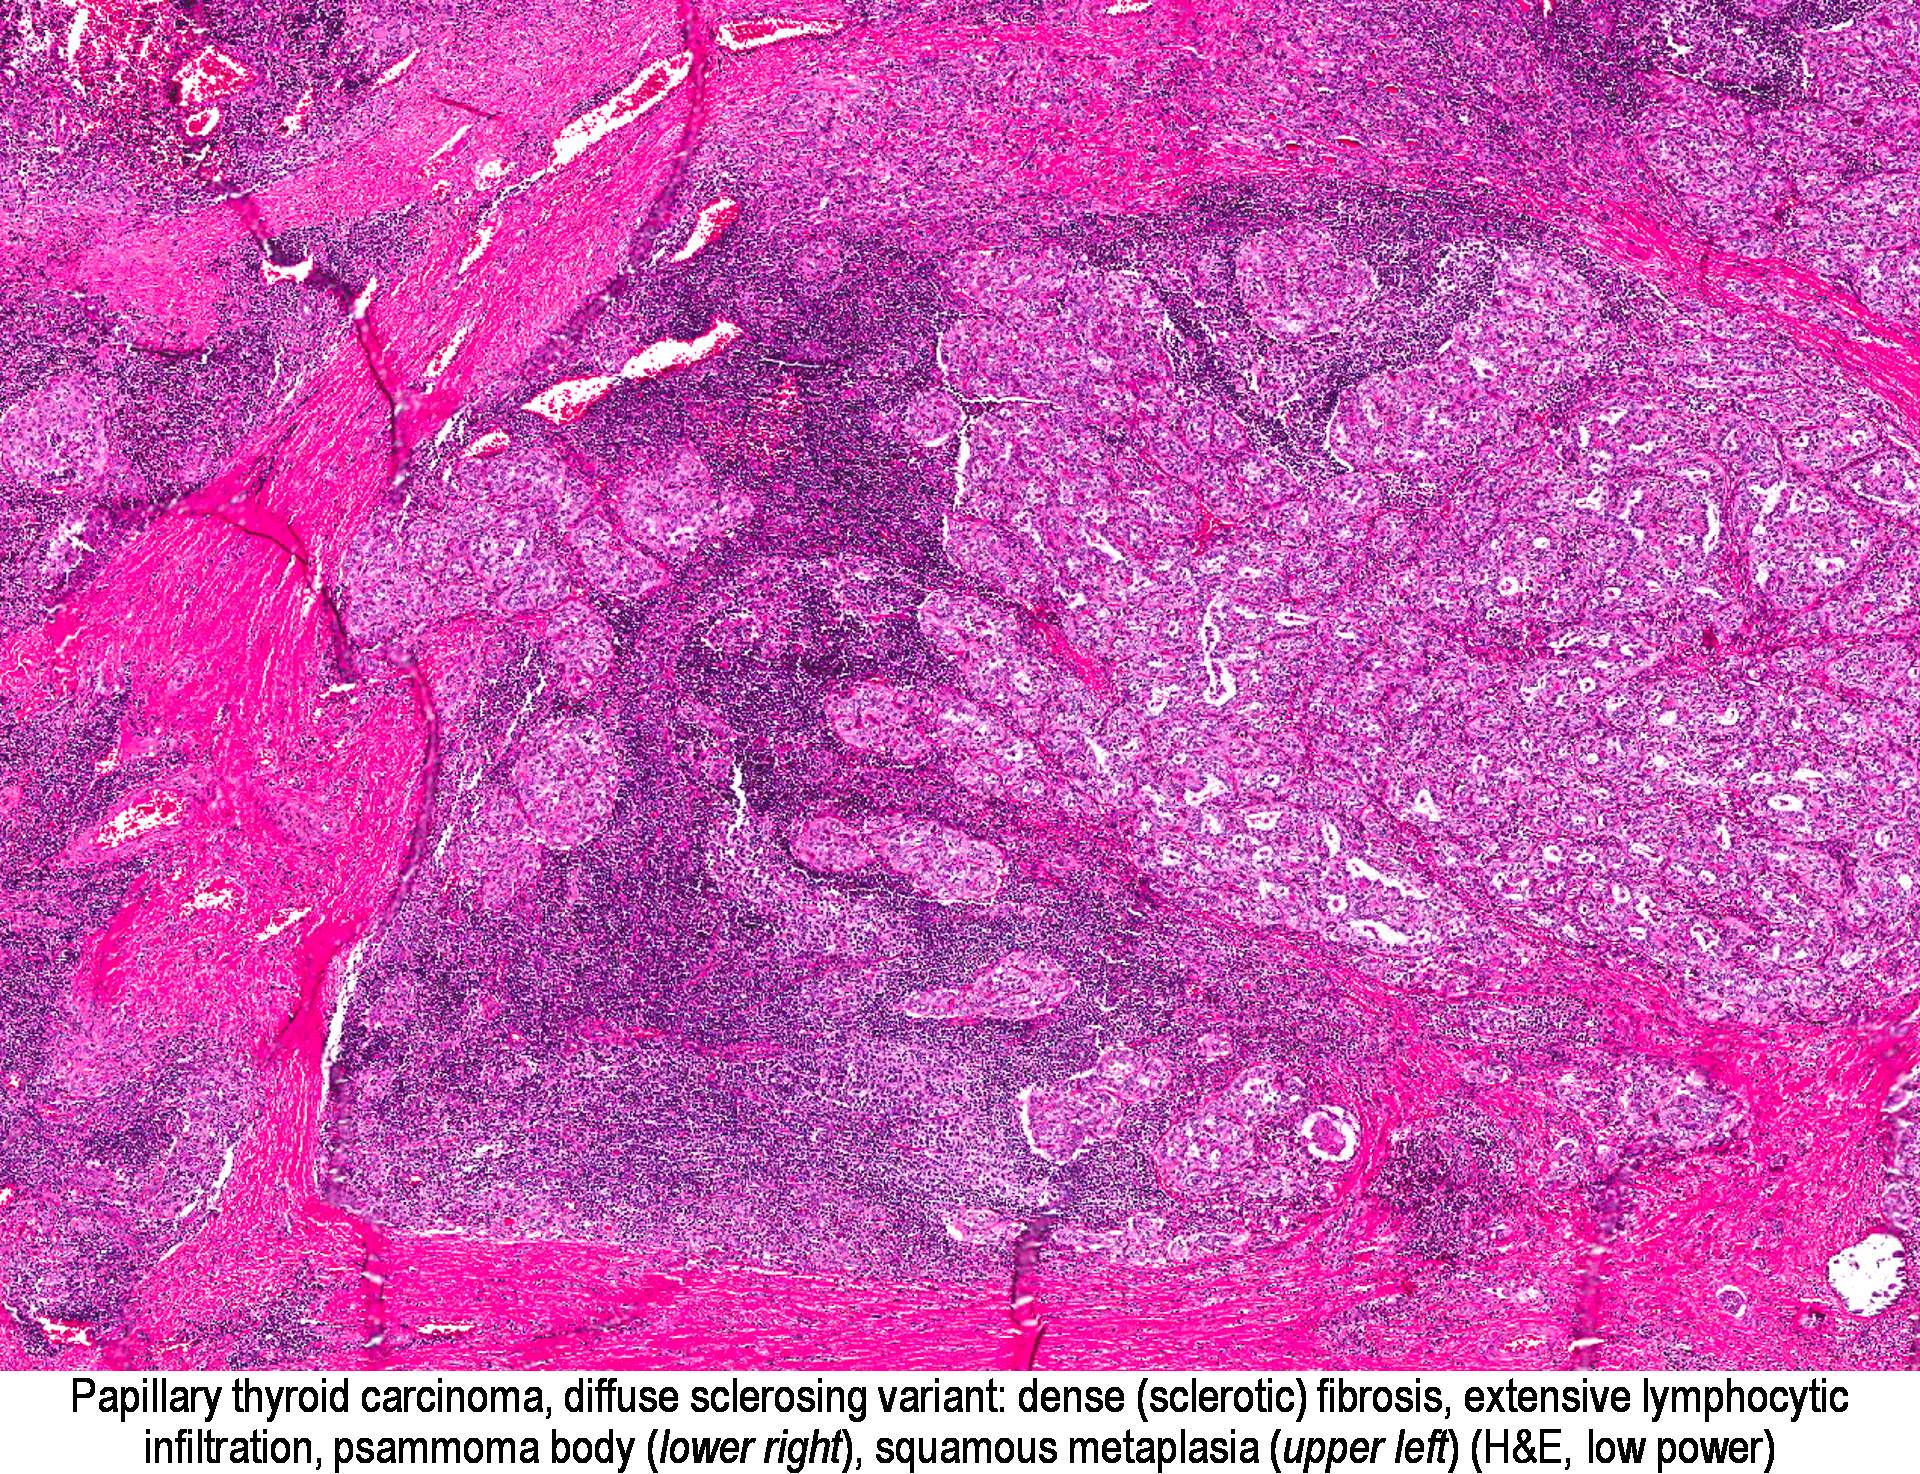 Fibrosis and lymphocytic infiltration